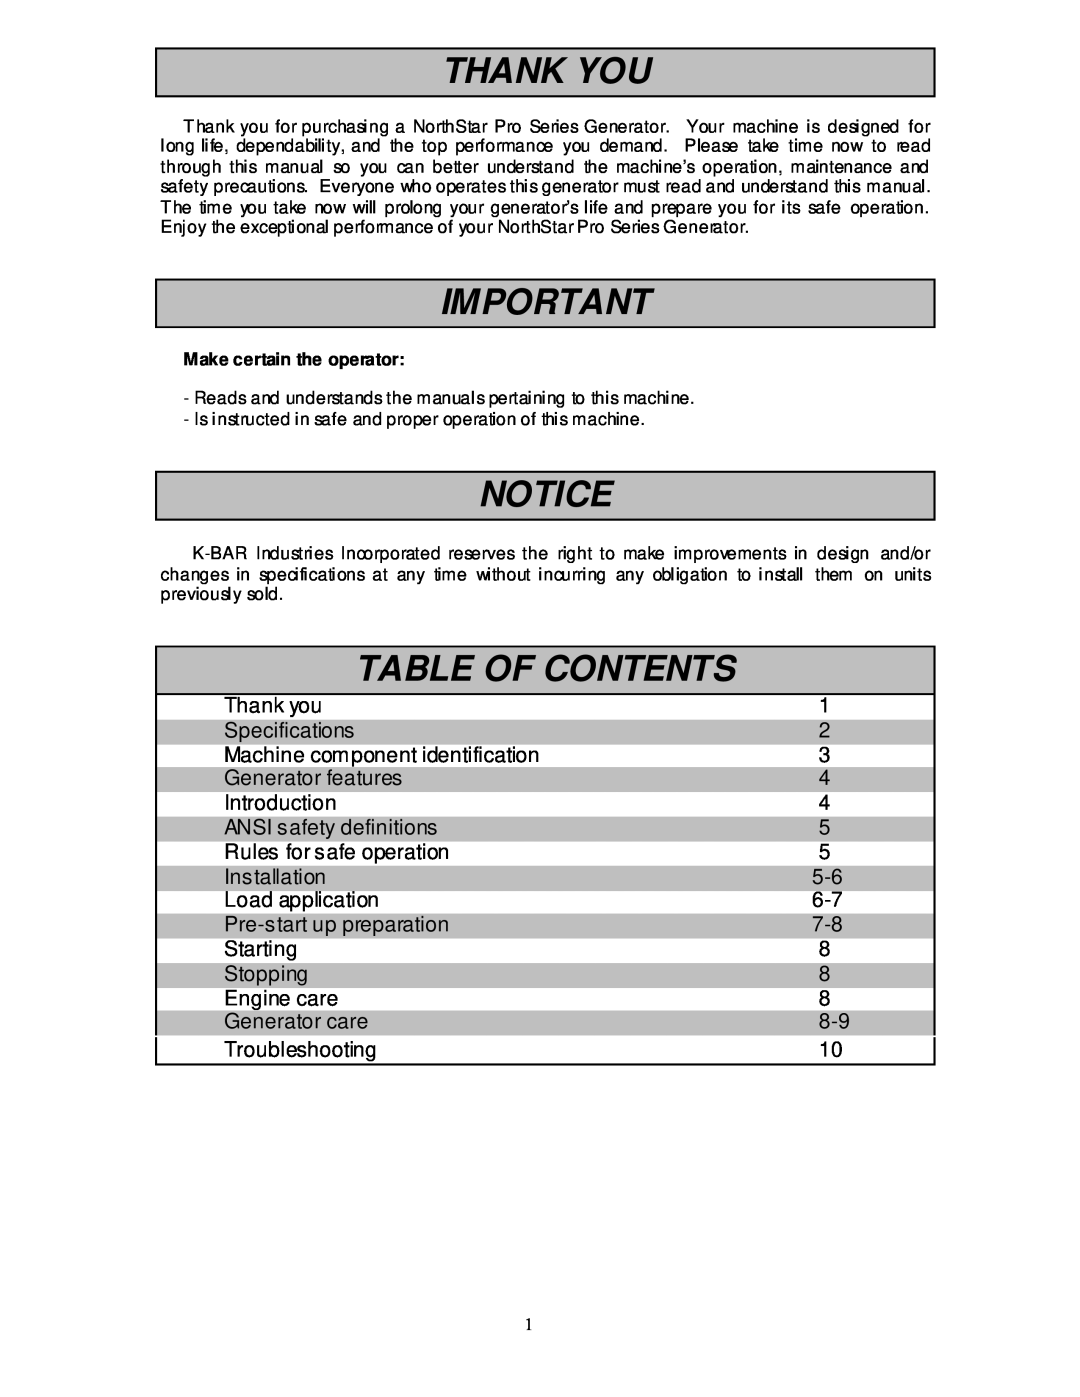 North Star 8000 PPG owner manual Thank You, Table Of Contents 